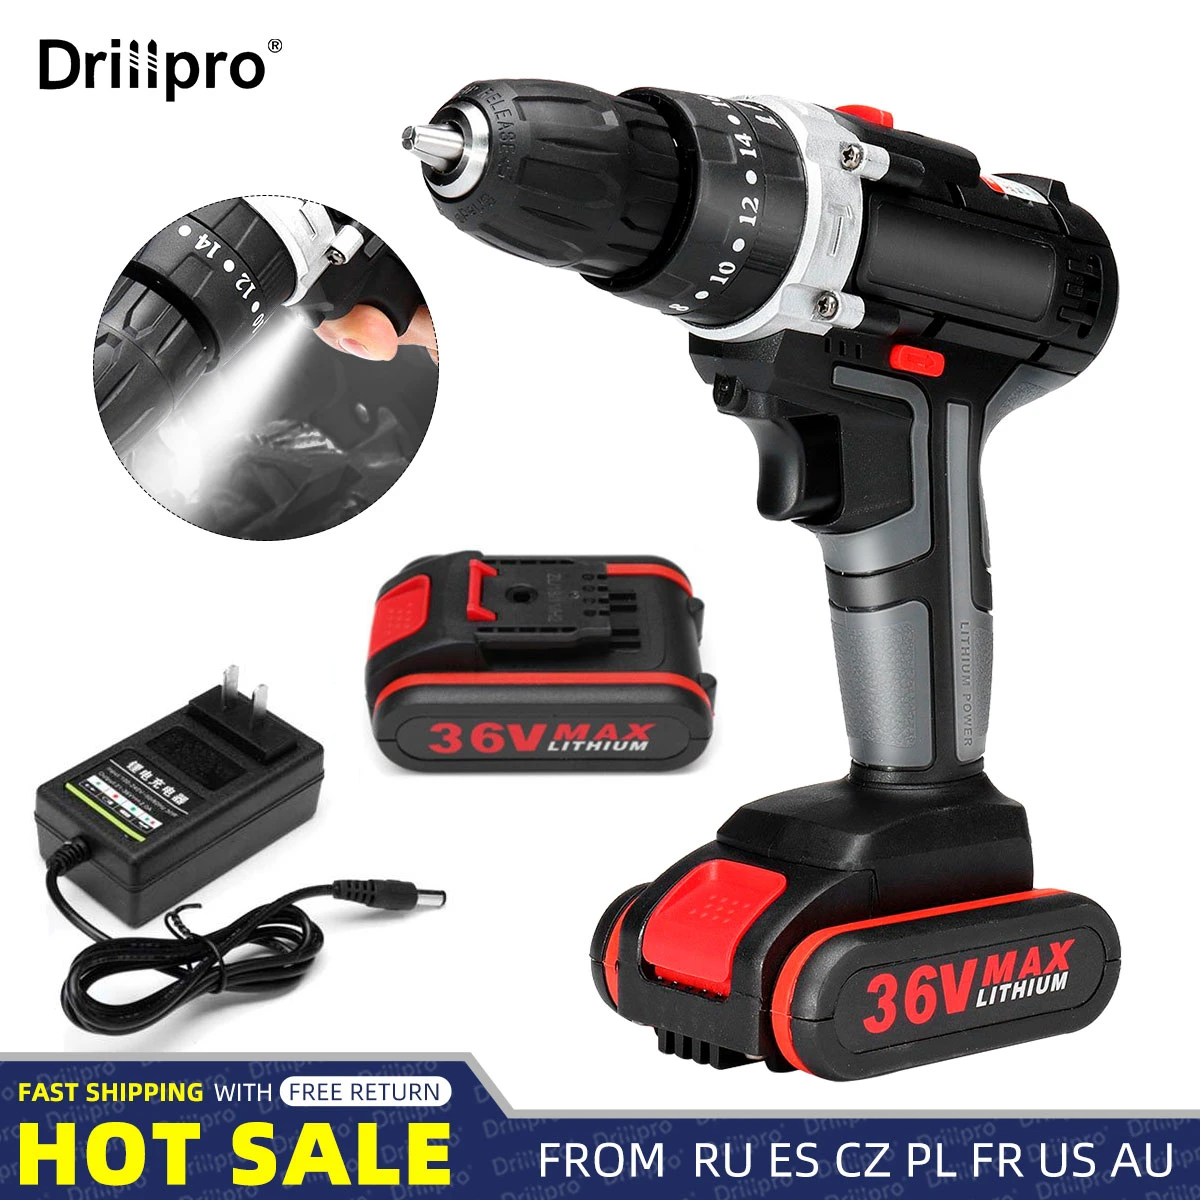 Drillpro 36V Mini Cordless Electric Drill Screwdriver 25+3Torque With LED Working Light Power Tools+ 1/2 pcs Lithium-Ion Battery